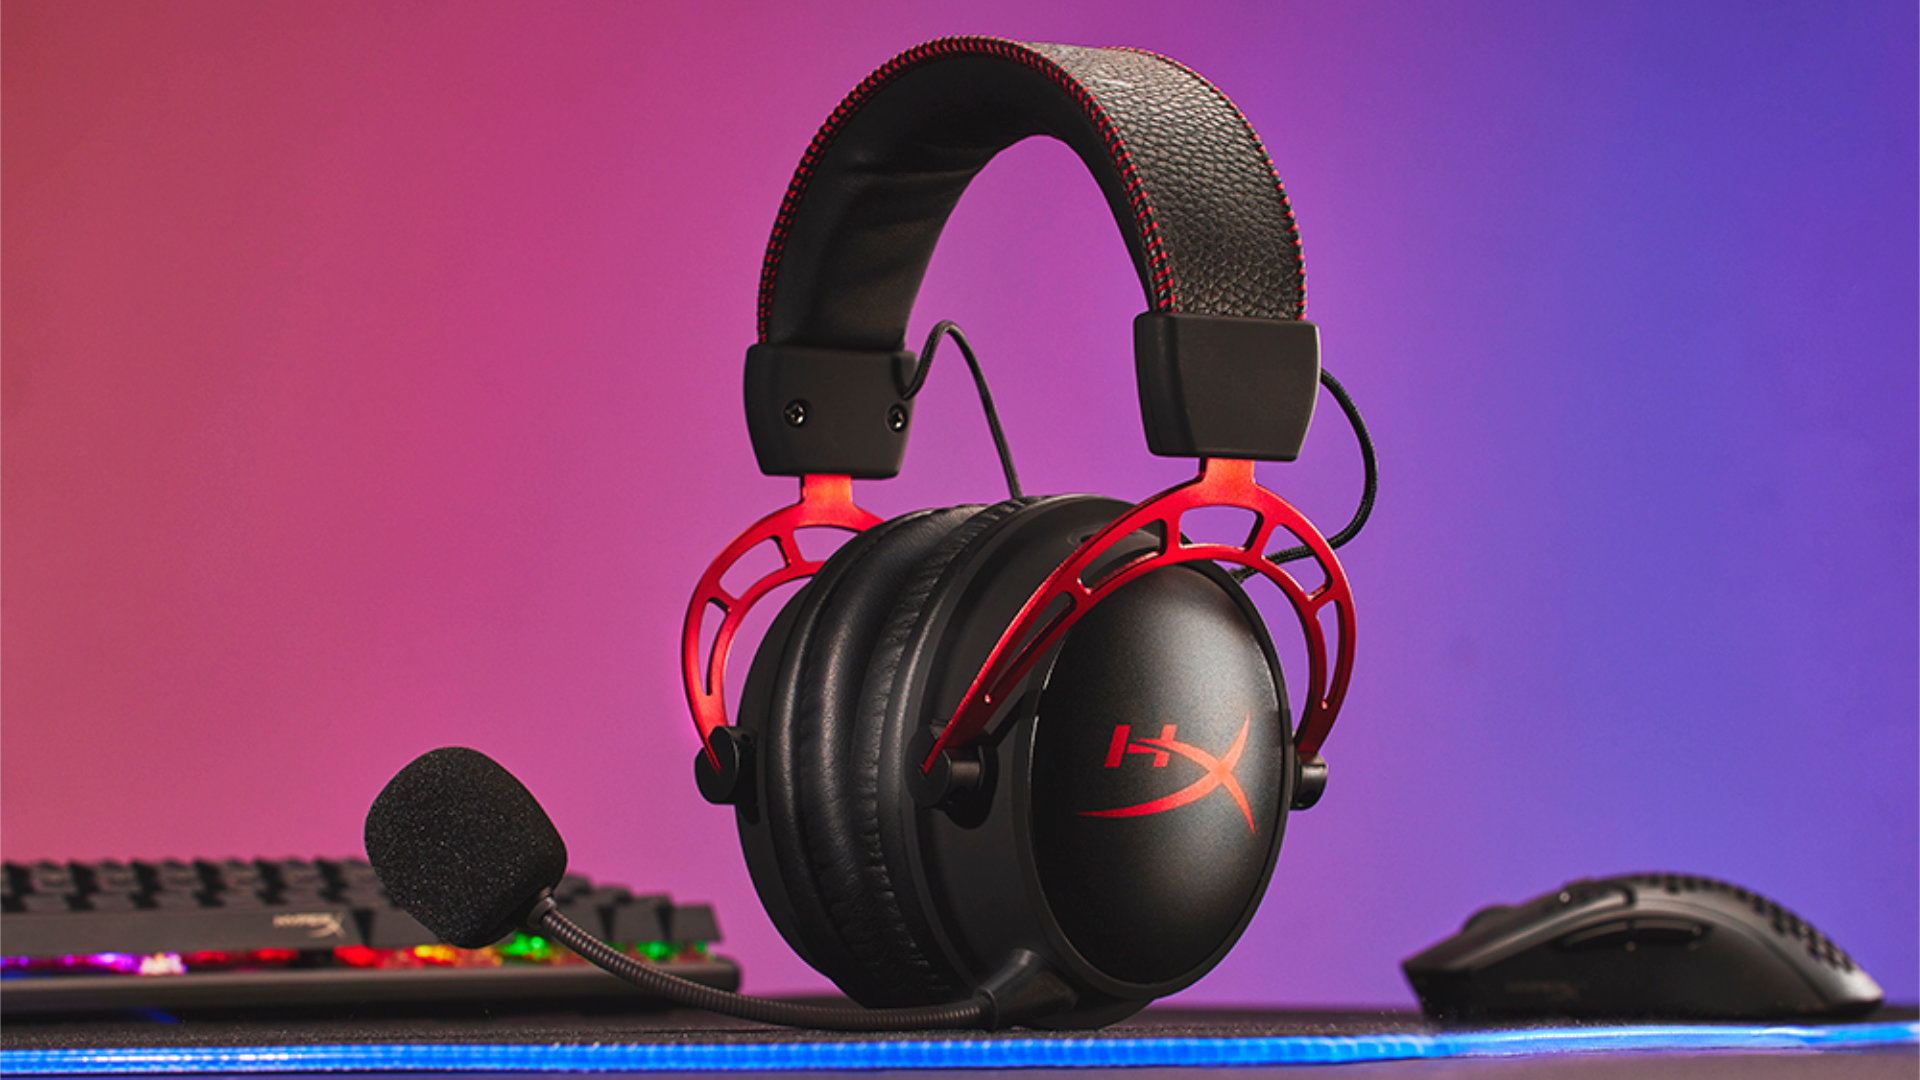 HyperX gives its Cloud Alpha Wireless gaming headset a 300-hour battery life